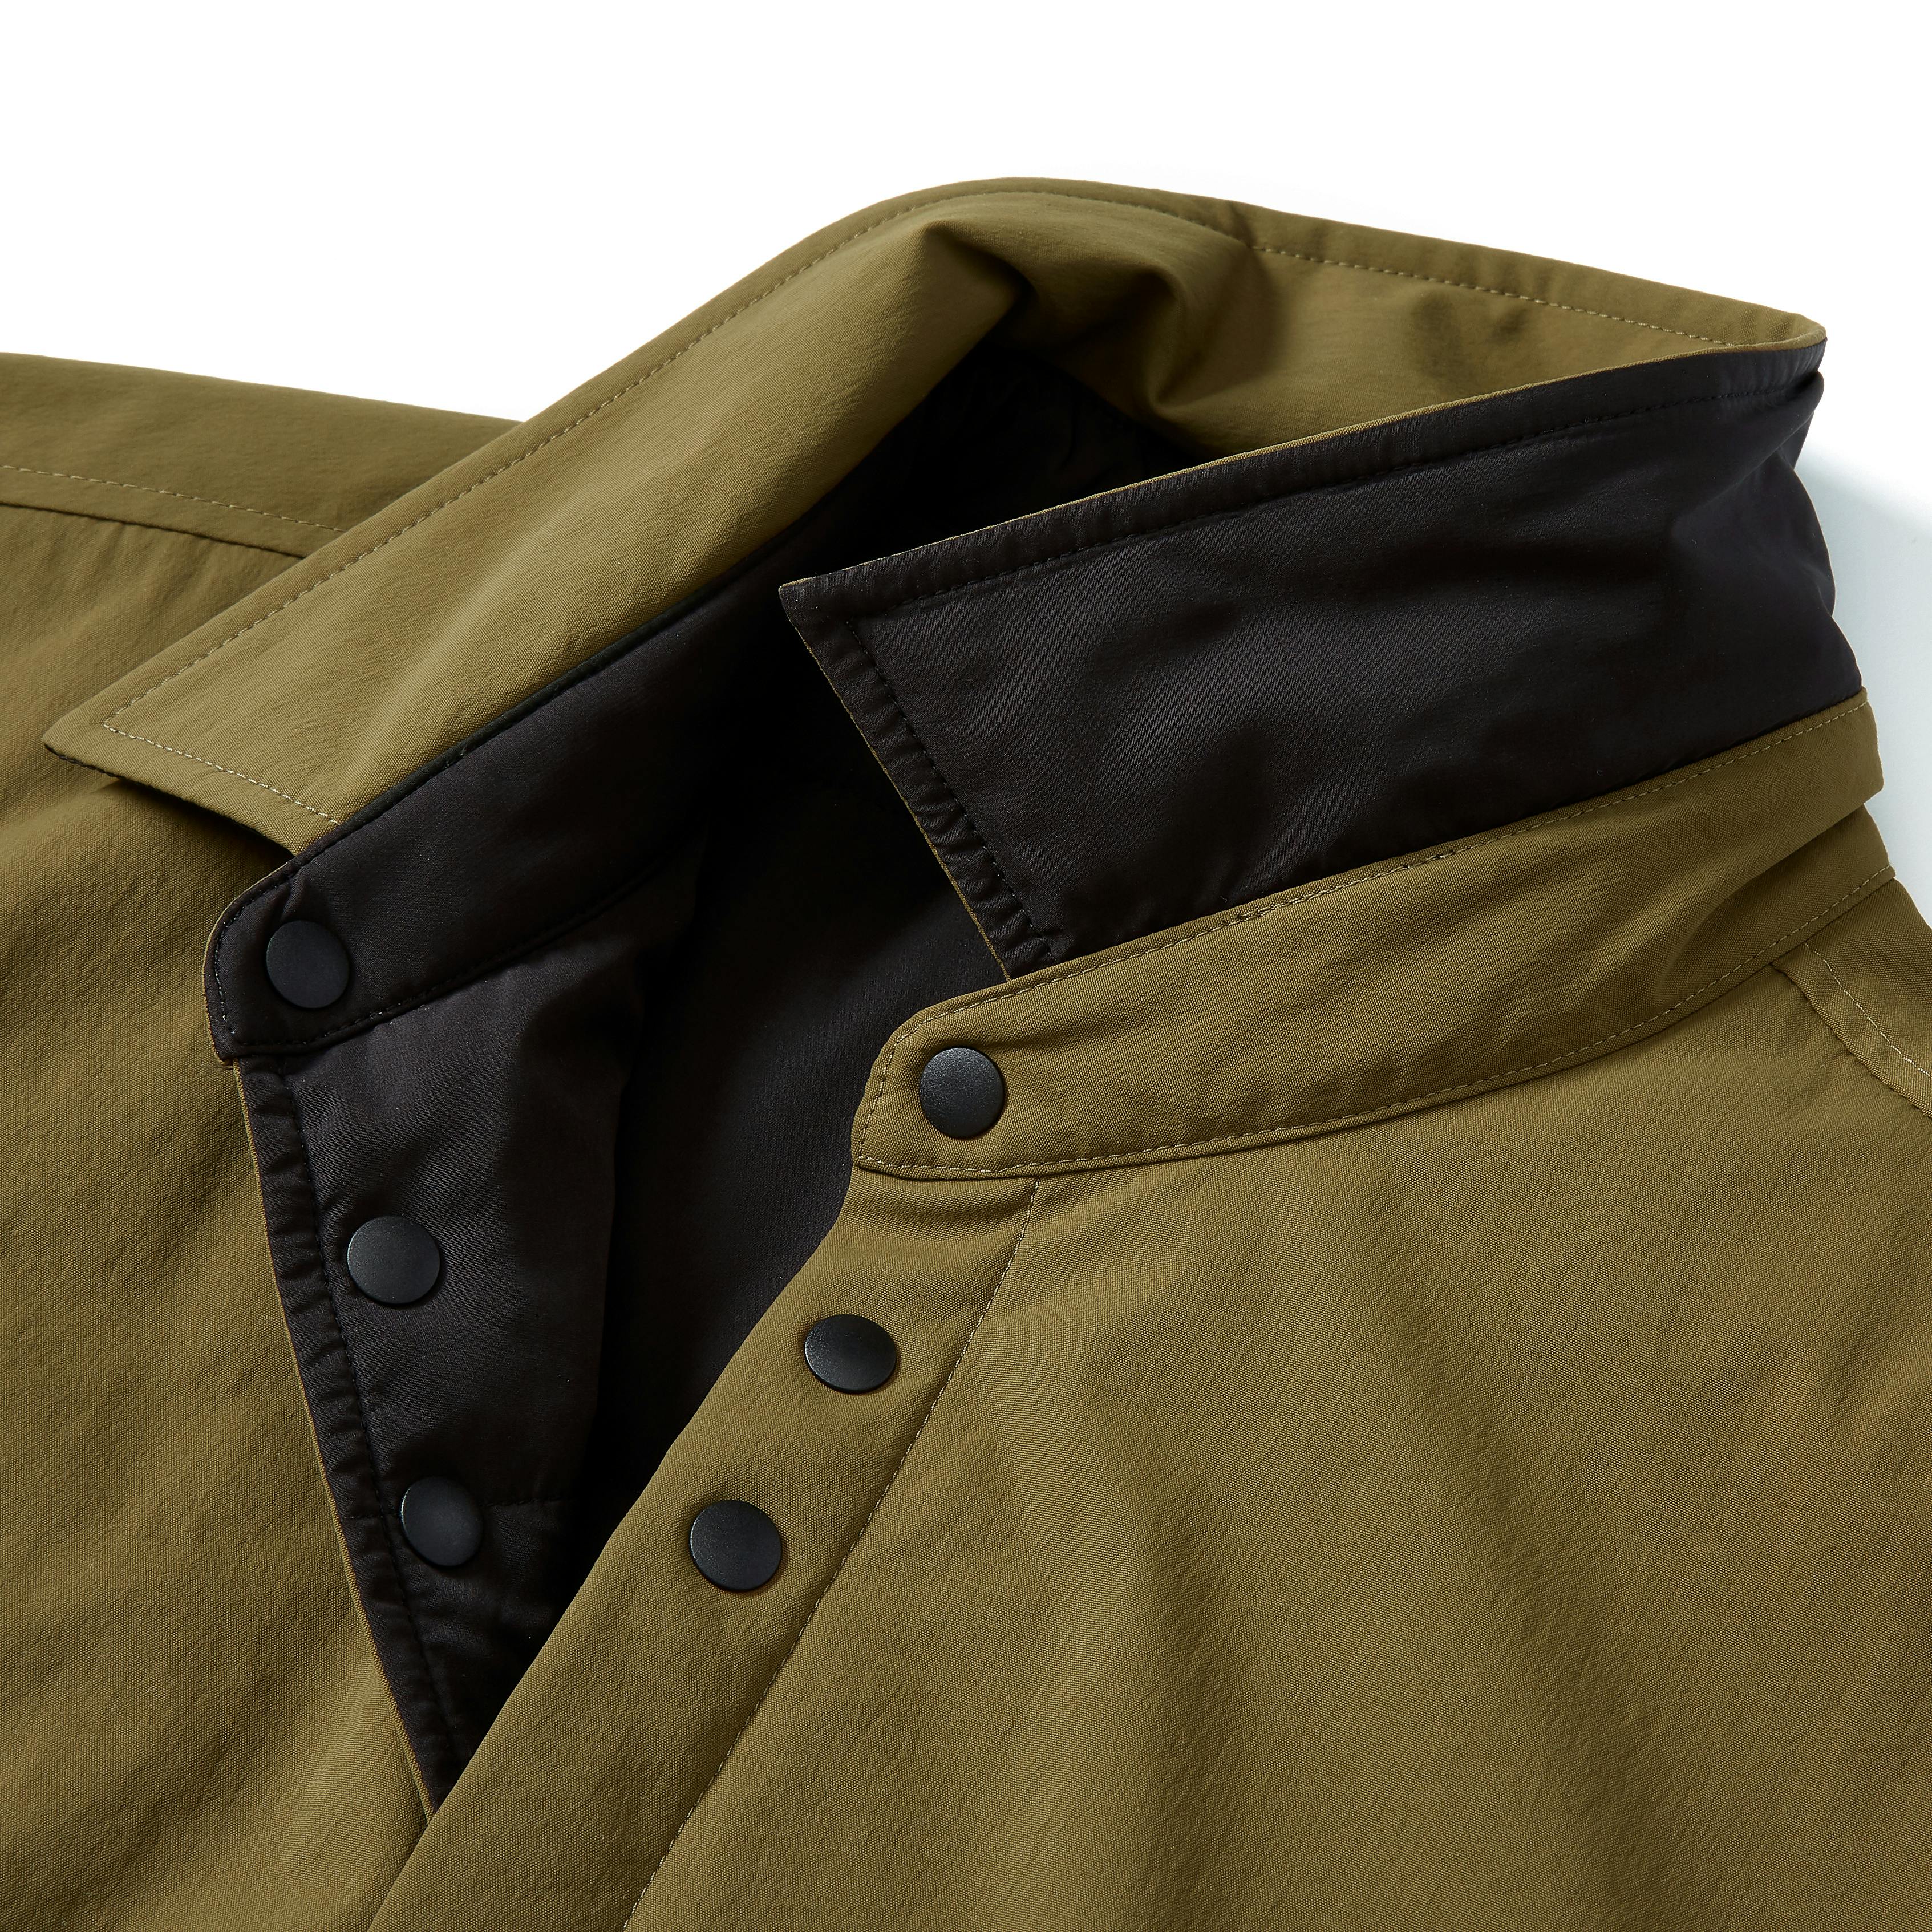 Men's Reversible Jackets: Browse 38 Products at $48.96+